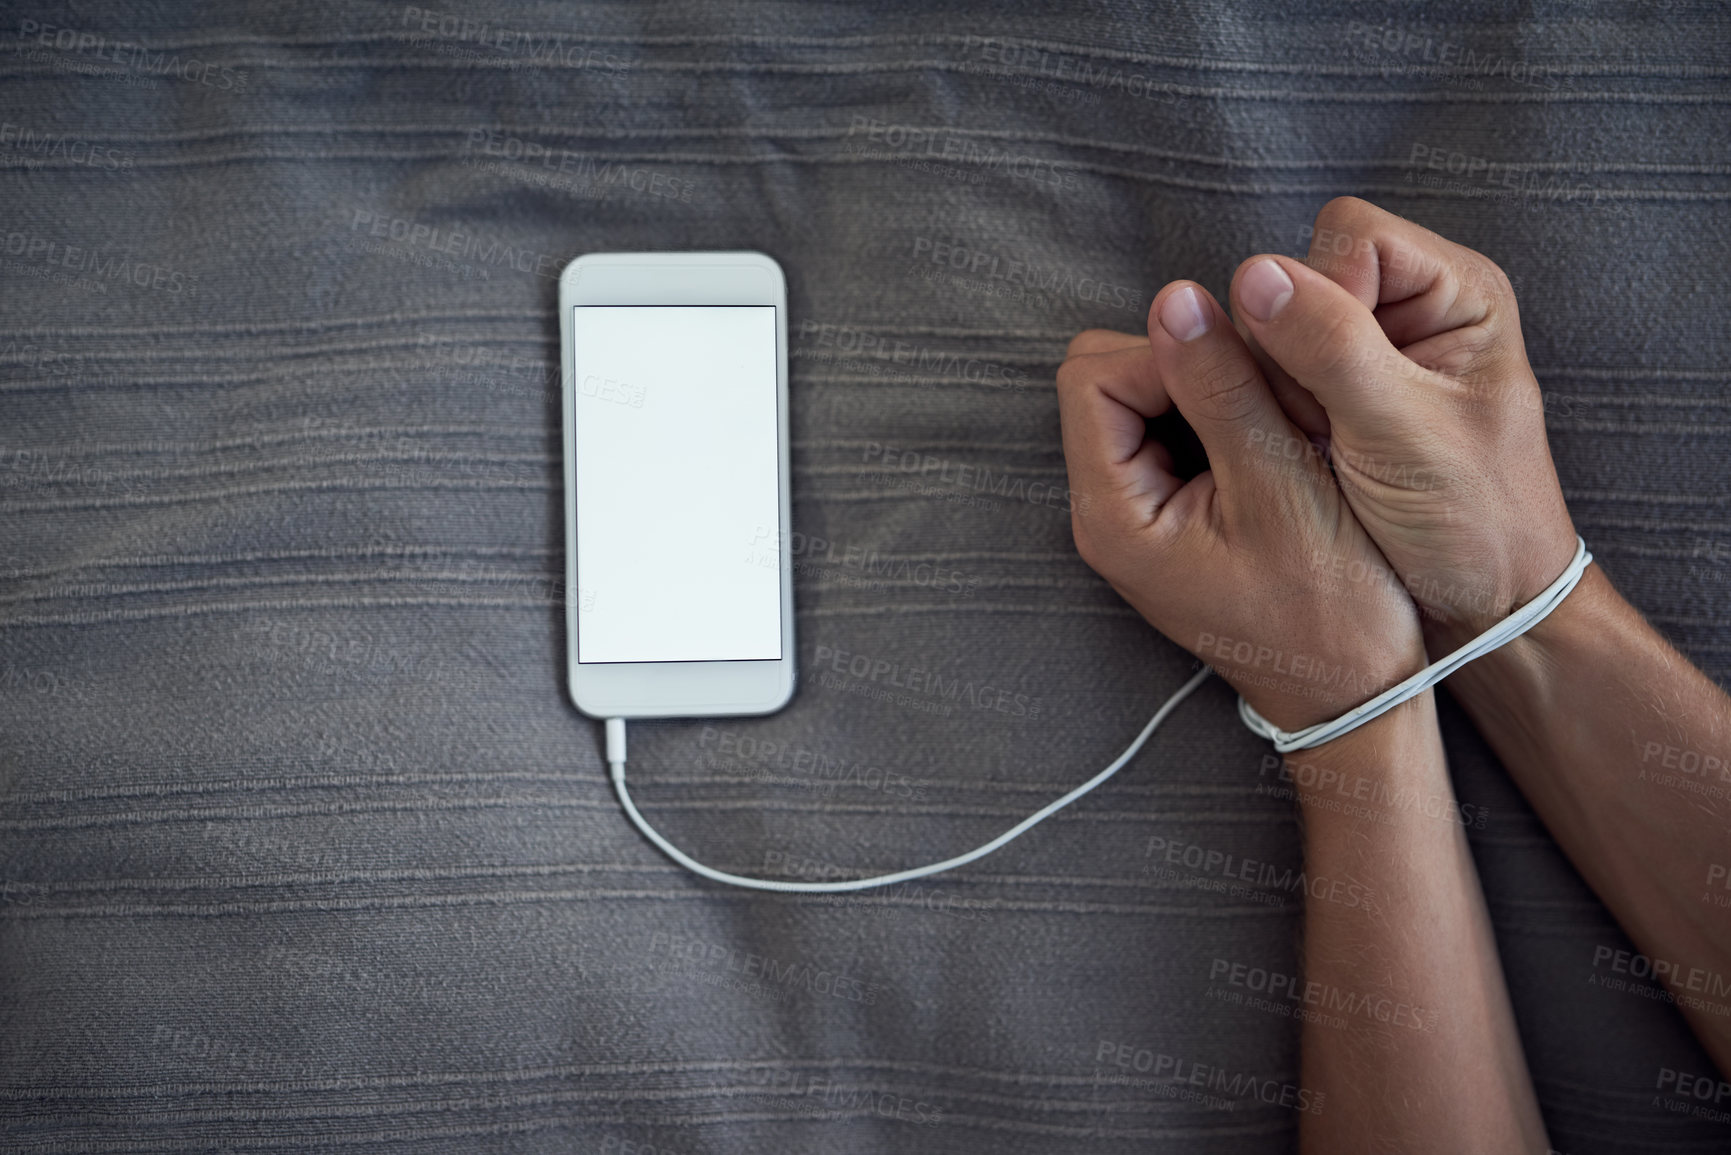 Buy stock photo Cropped shot of a unrecognizable person's hands bound by a cellphone charging cable